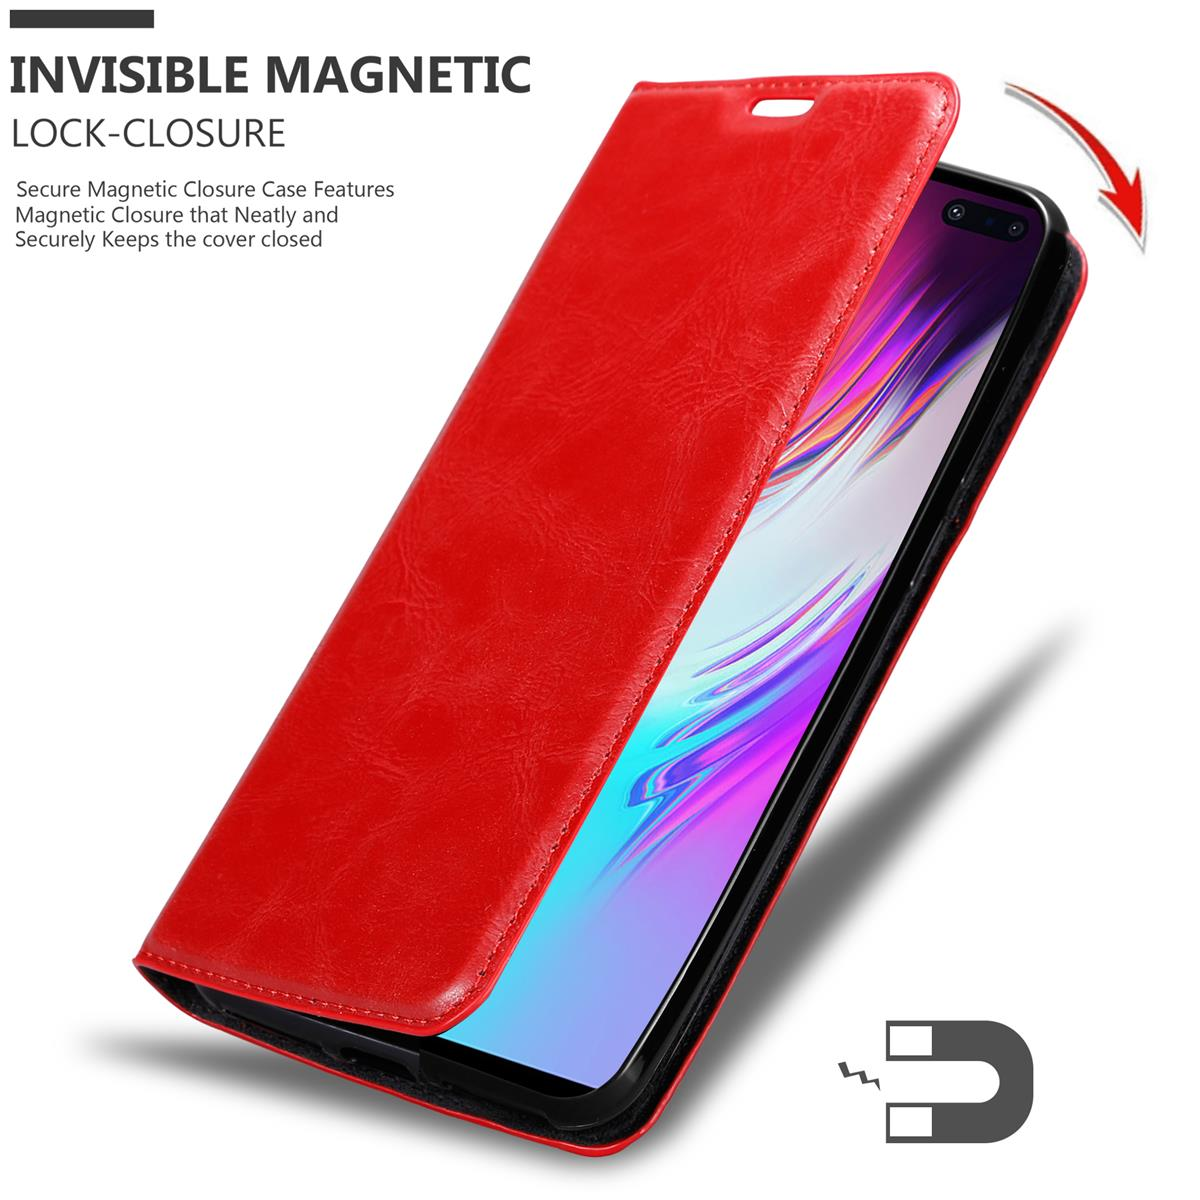 5G, S10 APFEL CADORABO Book Invisible Galaxy Bookcover, Hülle ROT Samsung, Magnet,